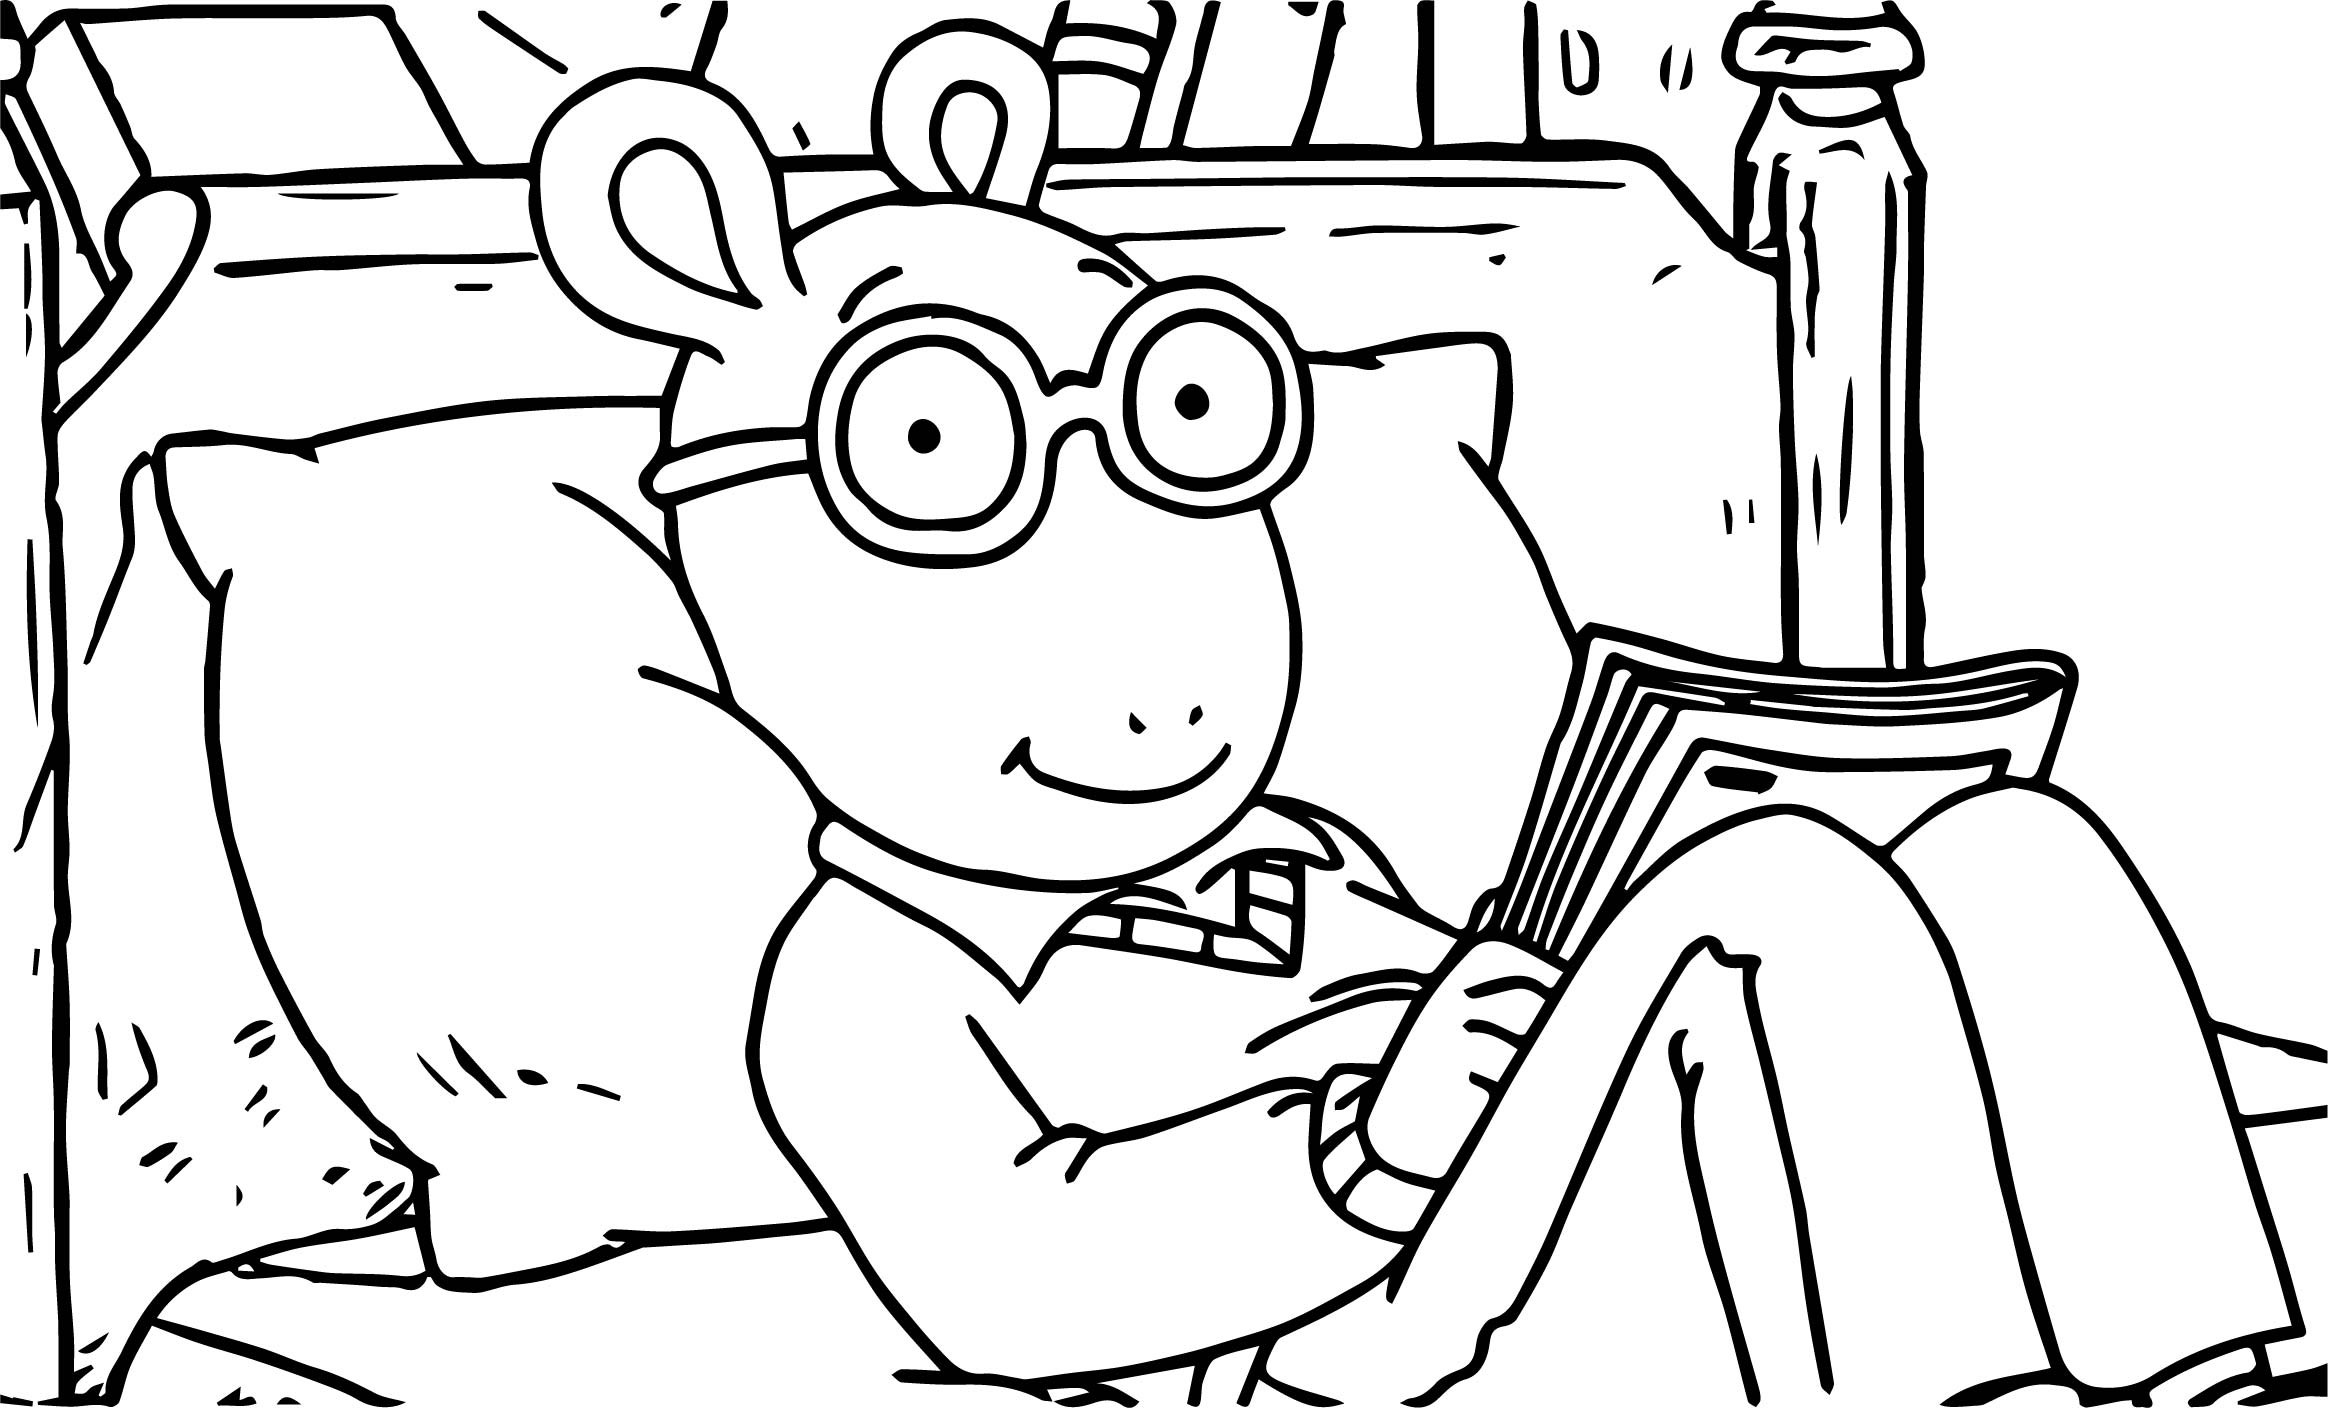 College Coloring Pages
 Arthur College Coloring Page